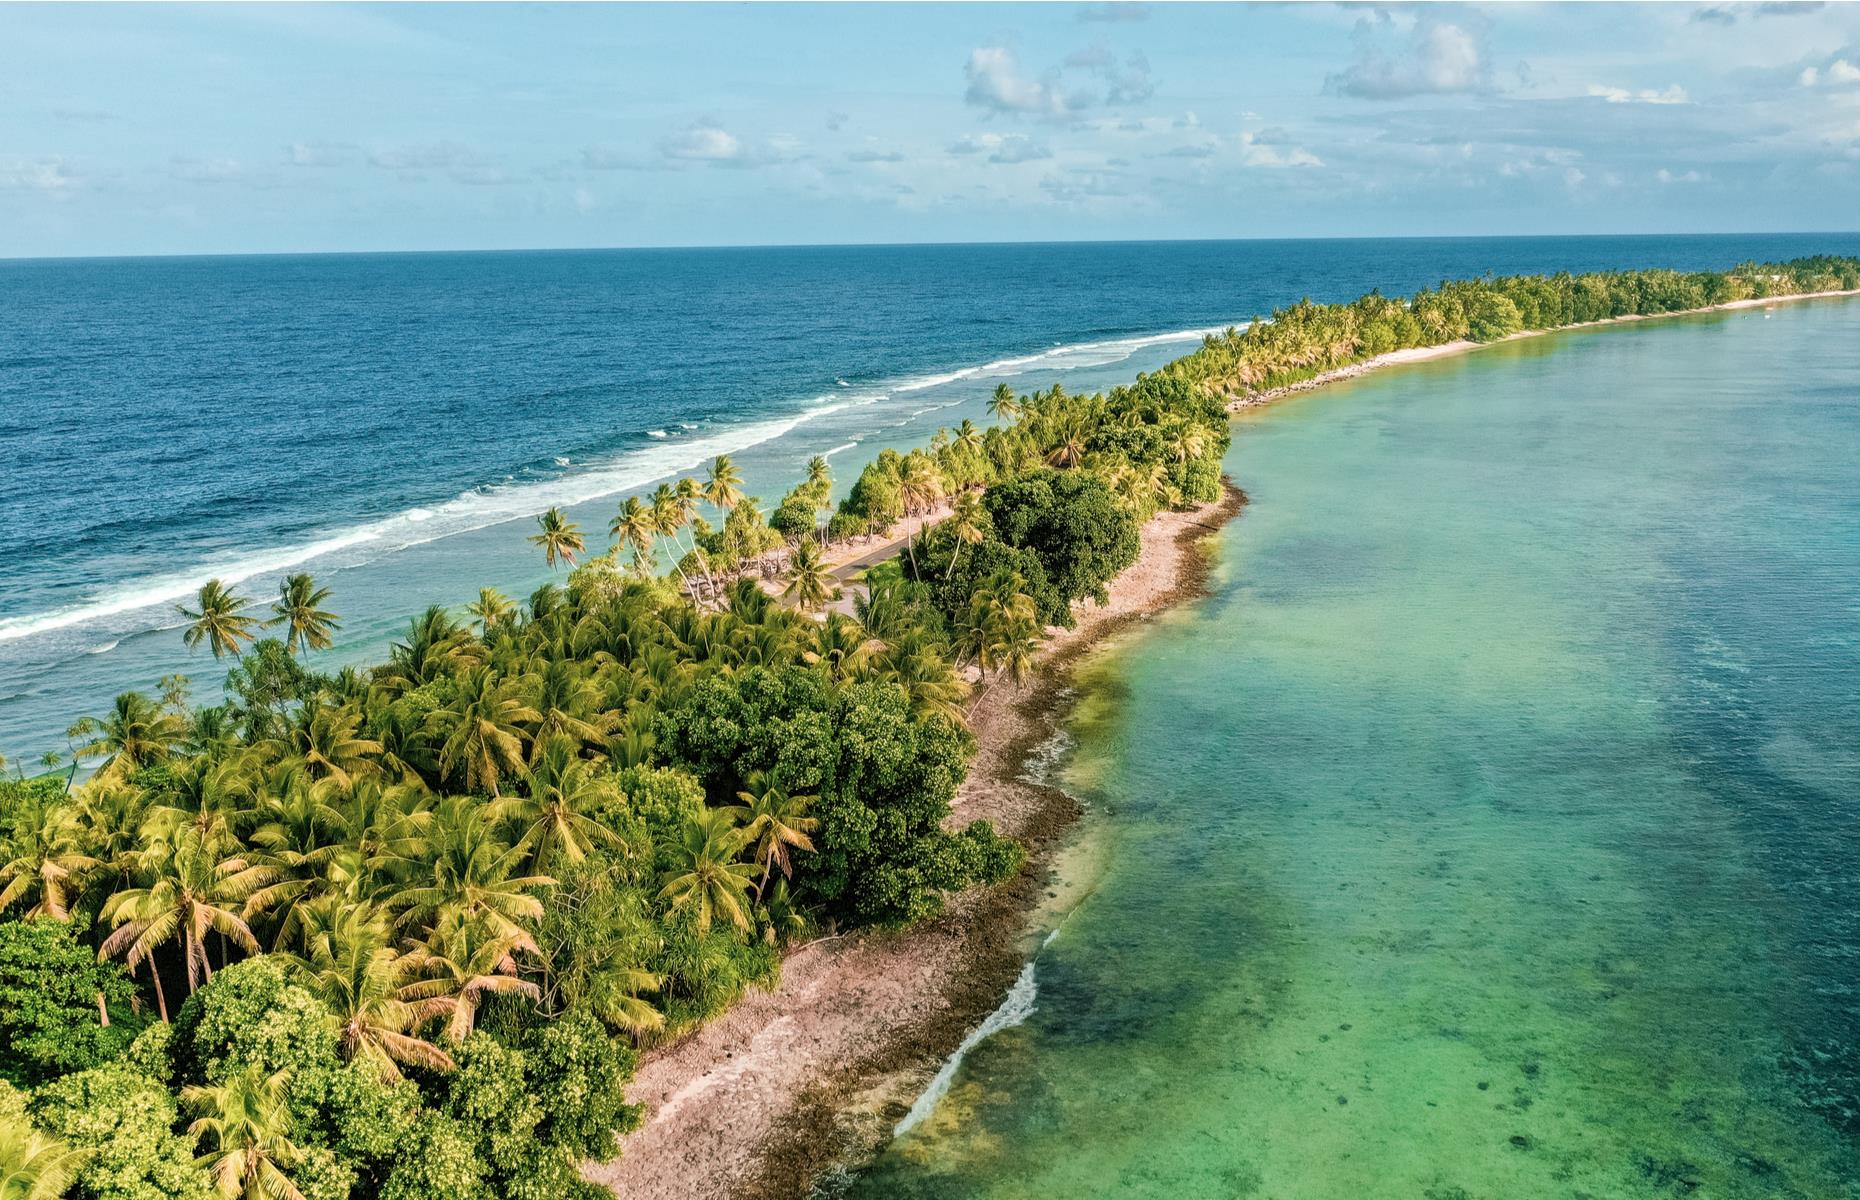 <p>This tiny archipelago, whose islands are scattered across the South Pacific, receives very few visitors annually – <a href="https://www.worlddata.info/oceania/tuvalu/tourism.php">just 2,700 people came here in 2018</a>. Made up of nine islands and located between Australia and Hawaii, the Polynesian country is a picture-perfect paradise. Yet its lack of infrastructure, with the population of around 11,000 people spread across the atolls, has kept visitor numbers down.</p>